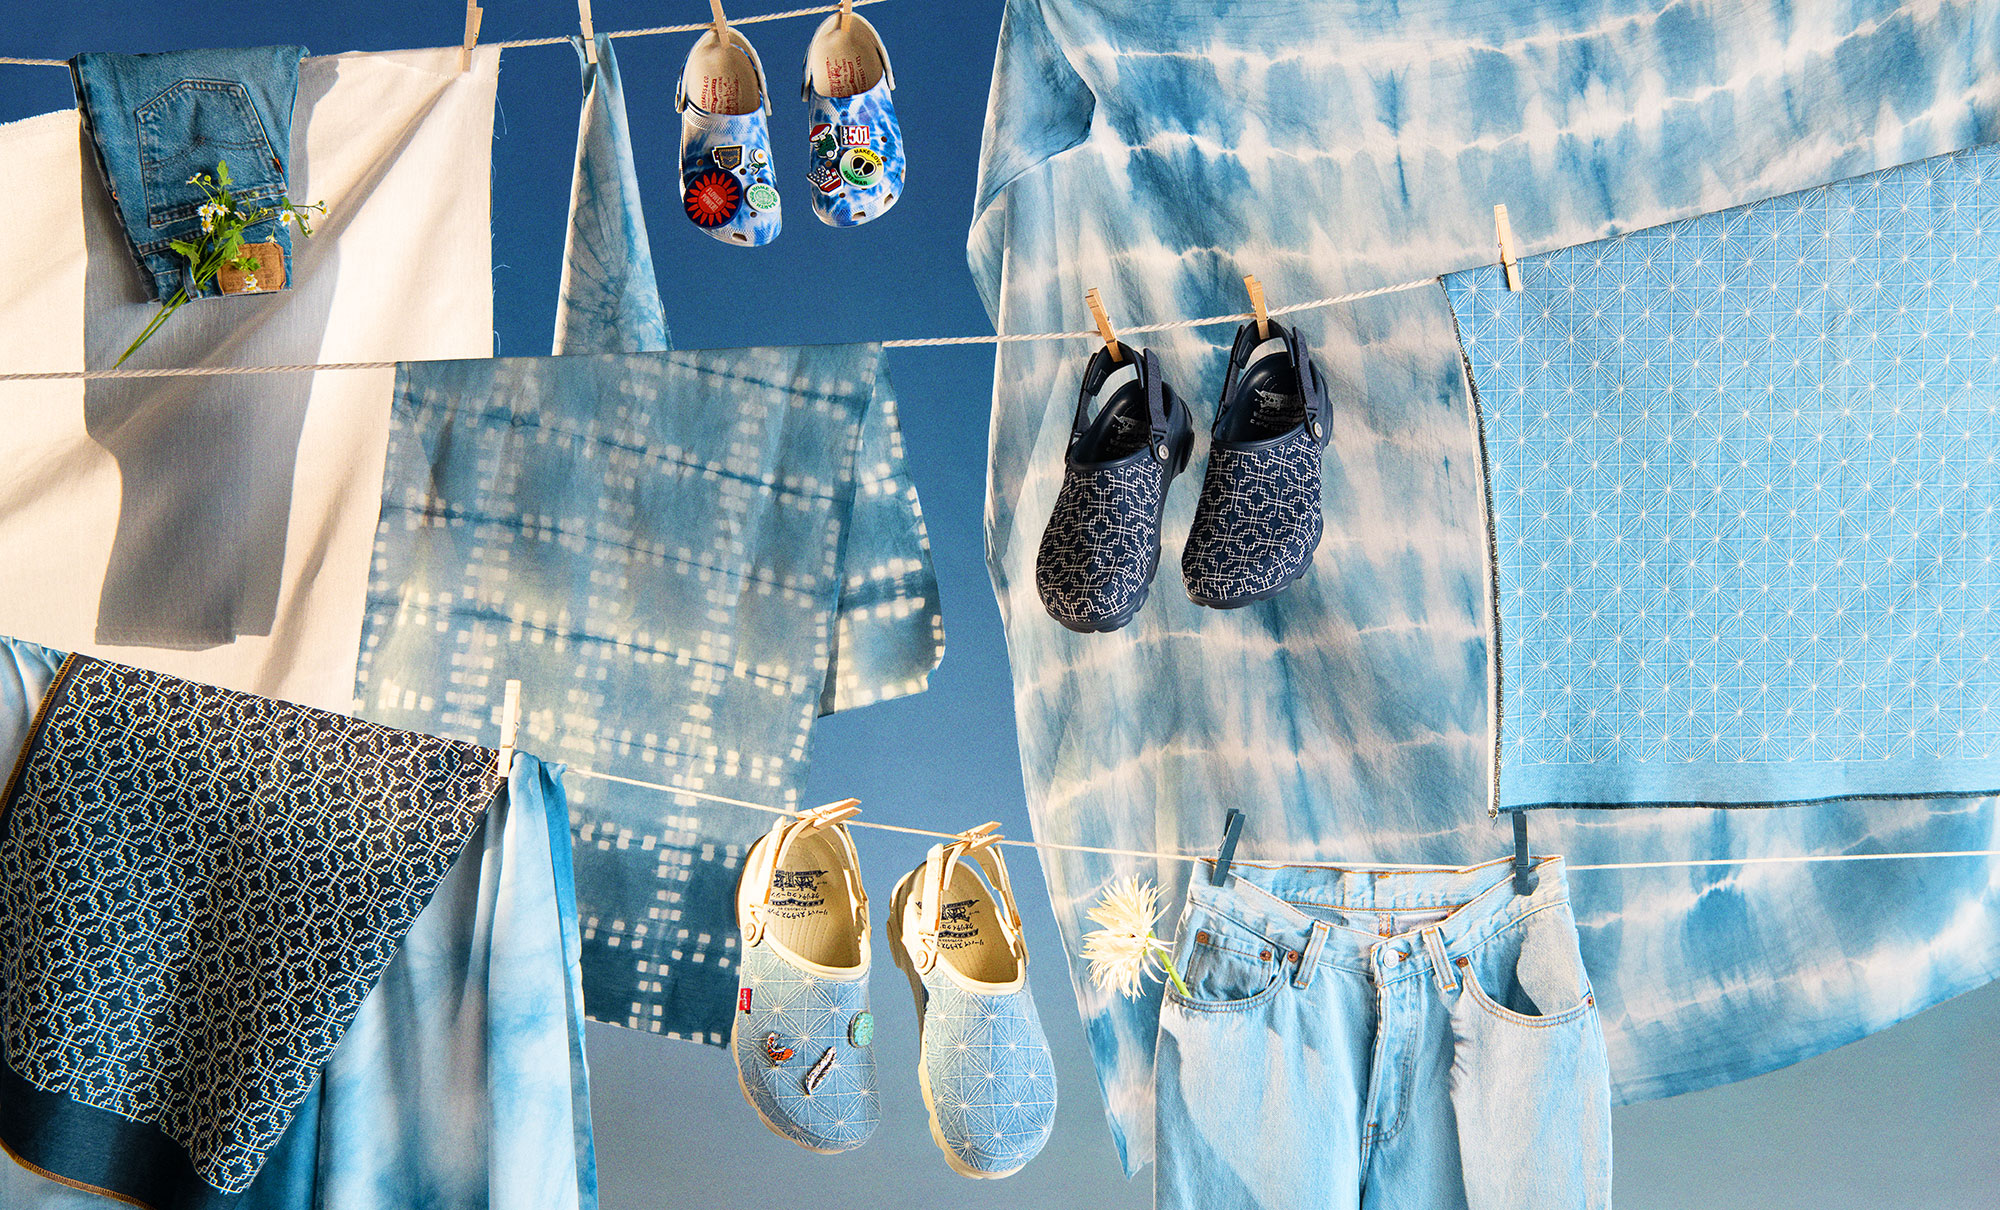 Three pairs of Levi's® Crocs hang on a stacked clothesline next to hanging tie-dye printed fabric.